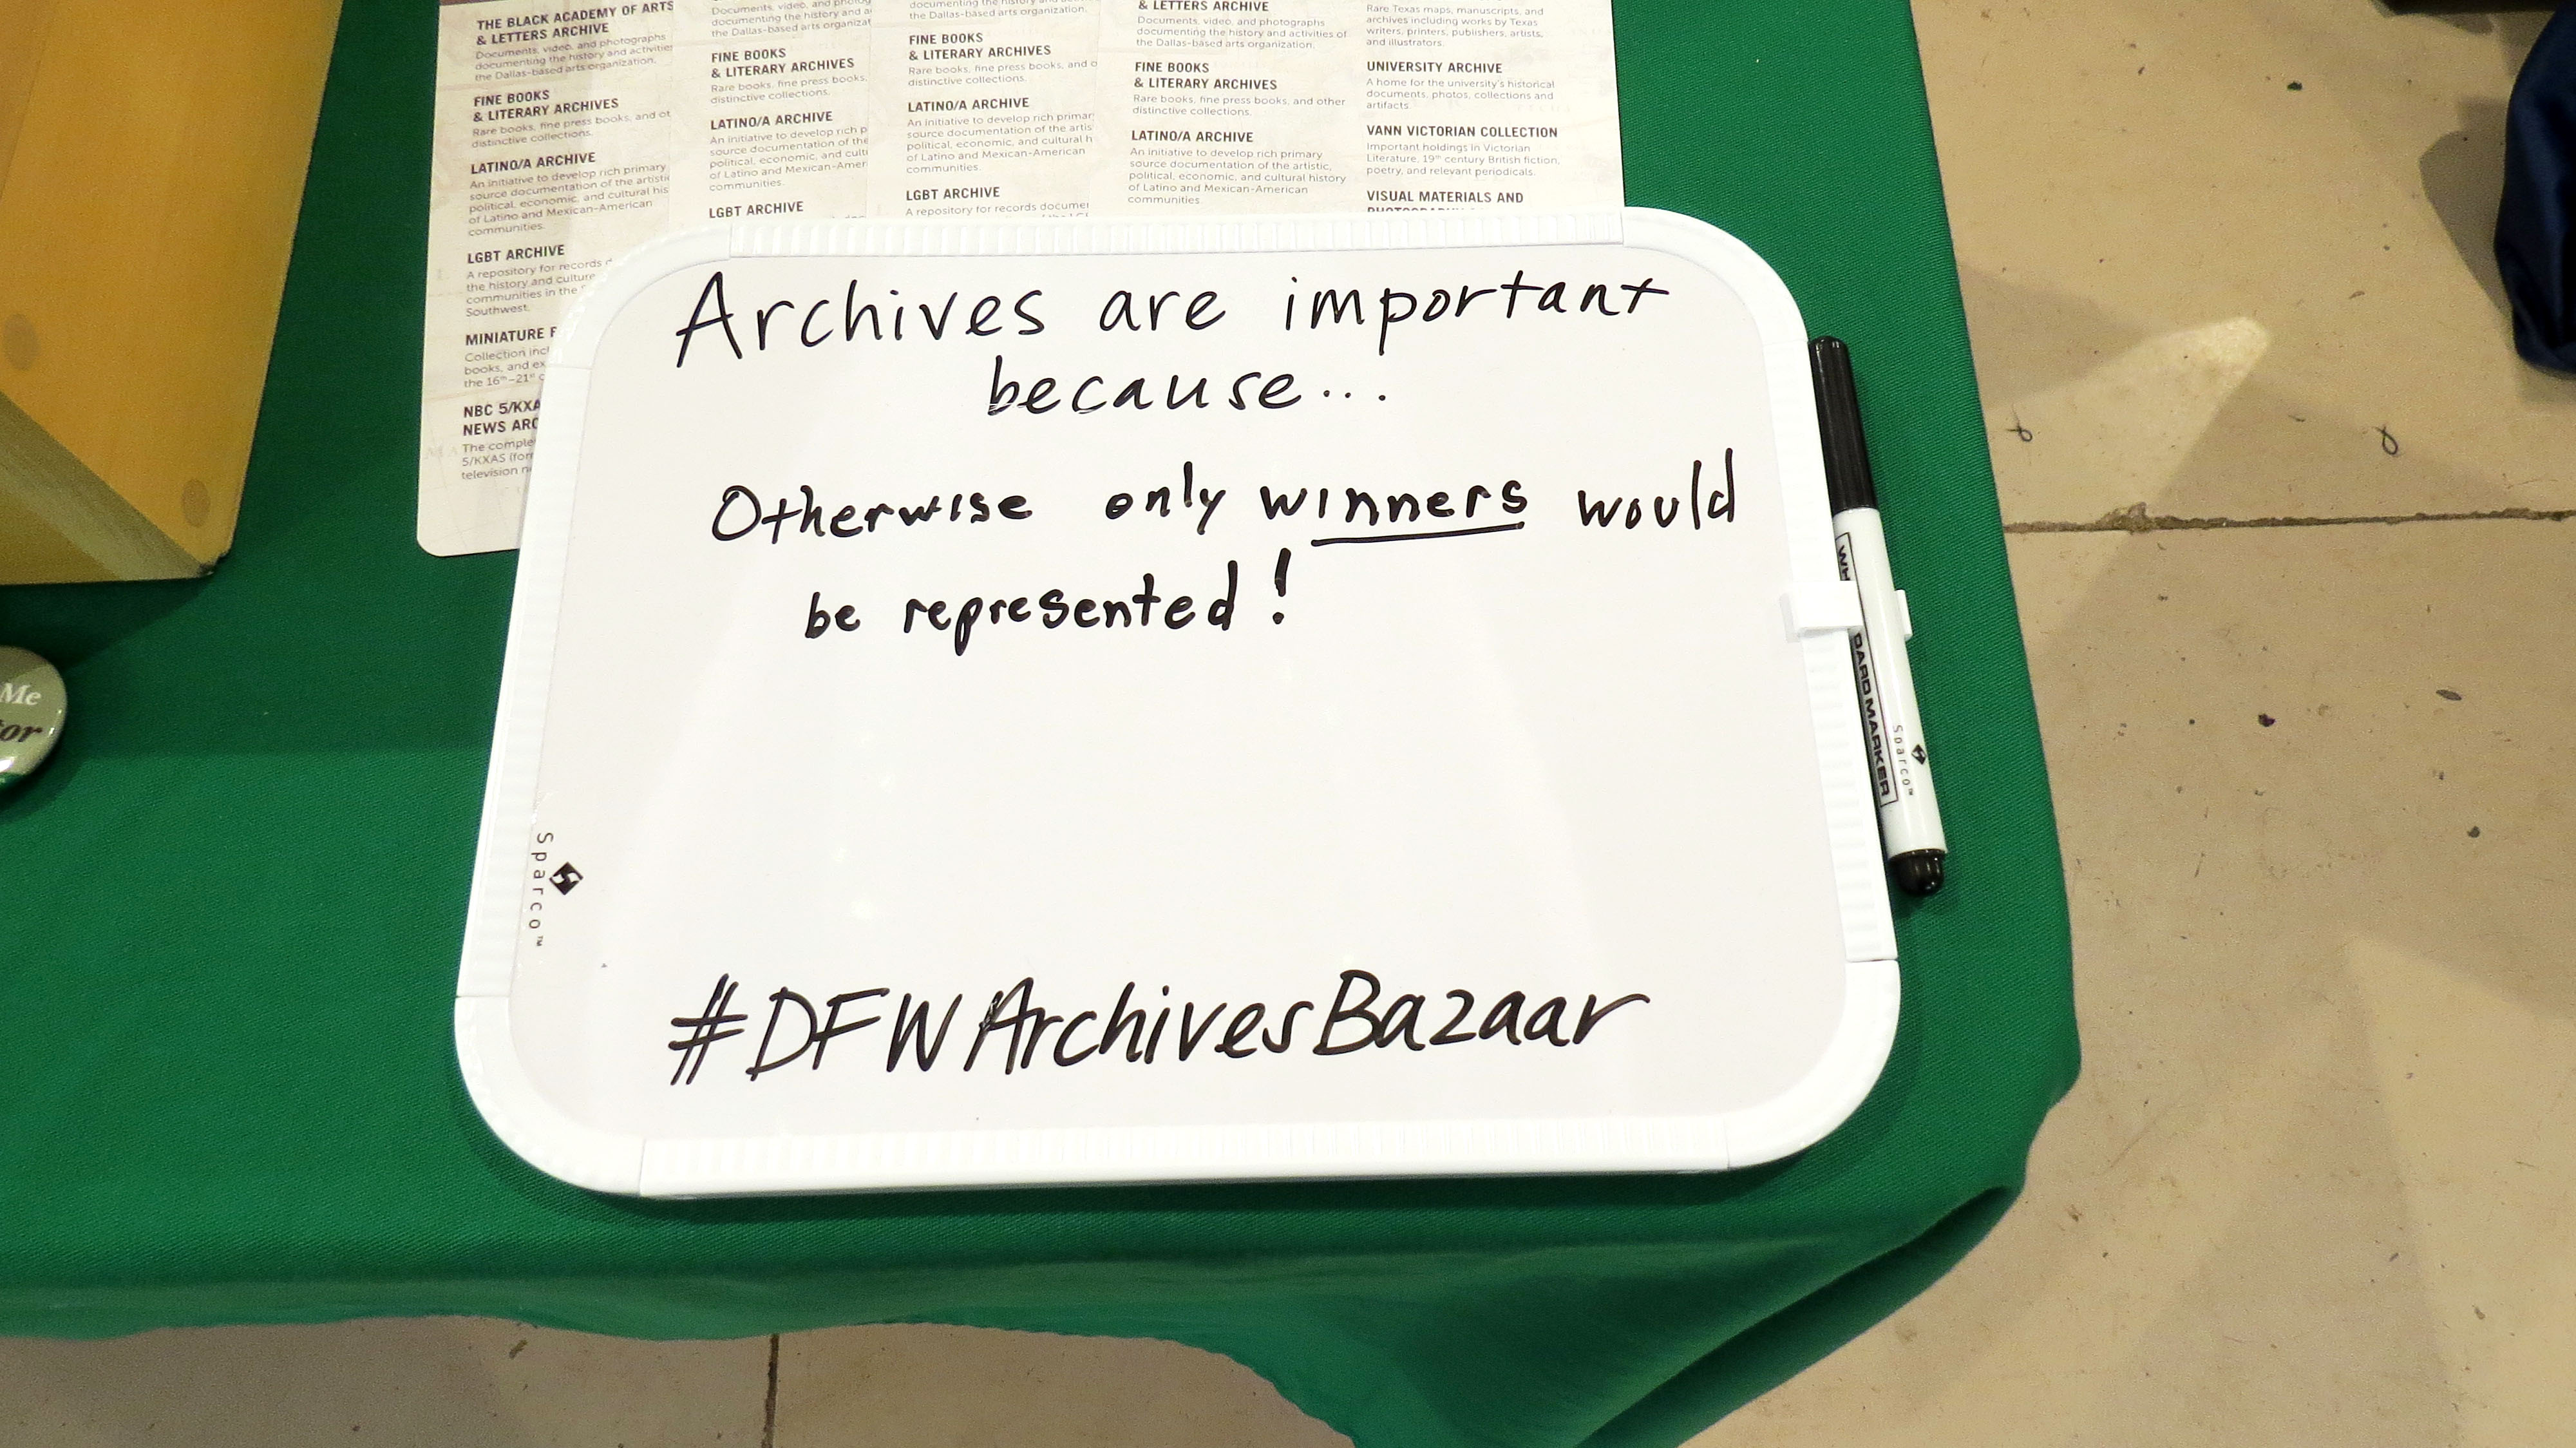 What Is Happening at This Year’s DFW Archives Bazaar